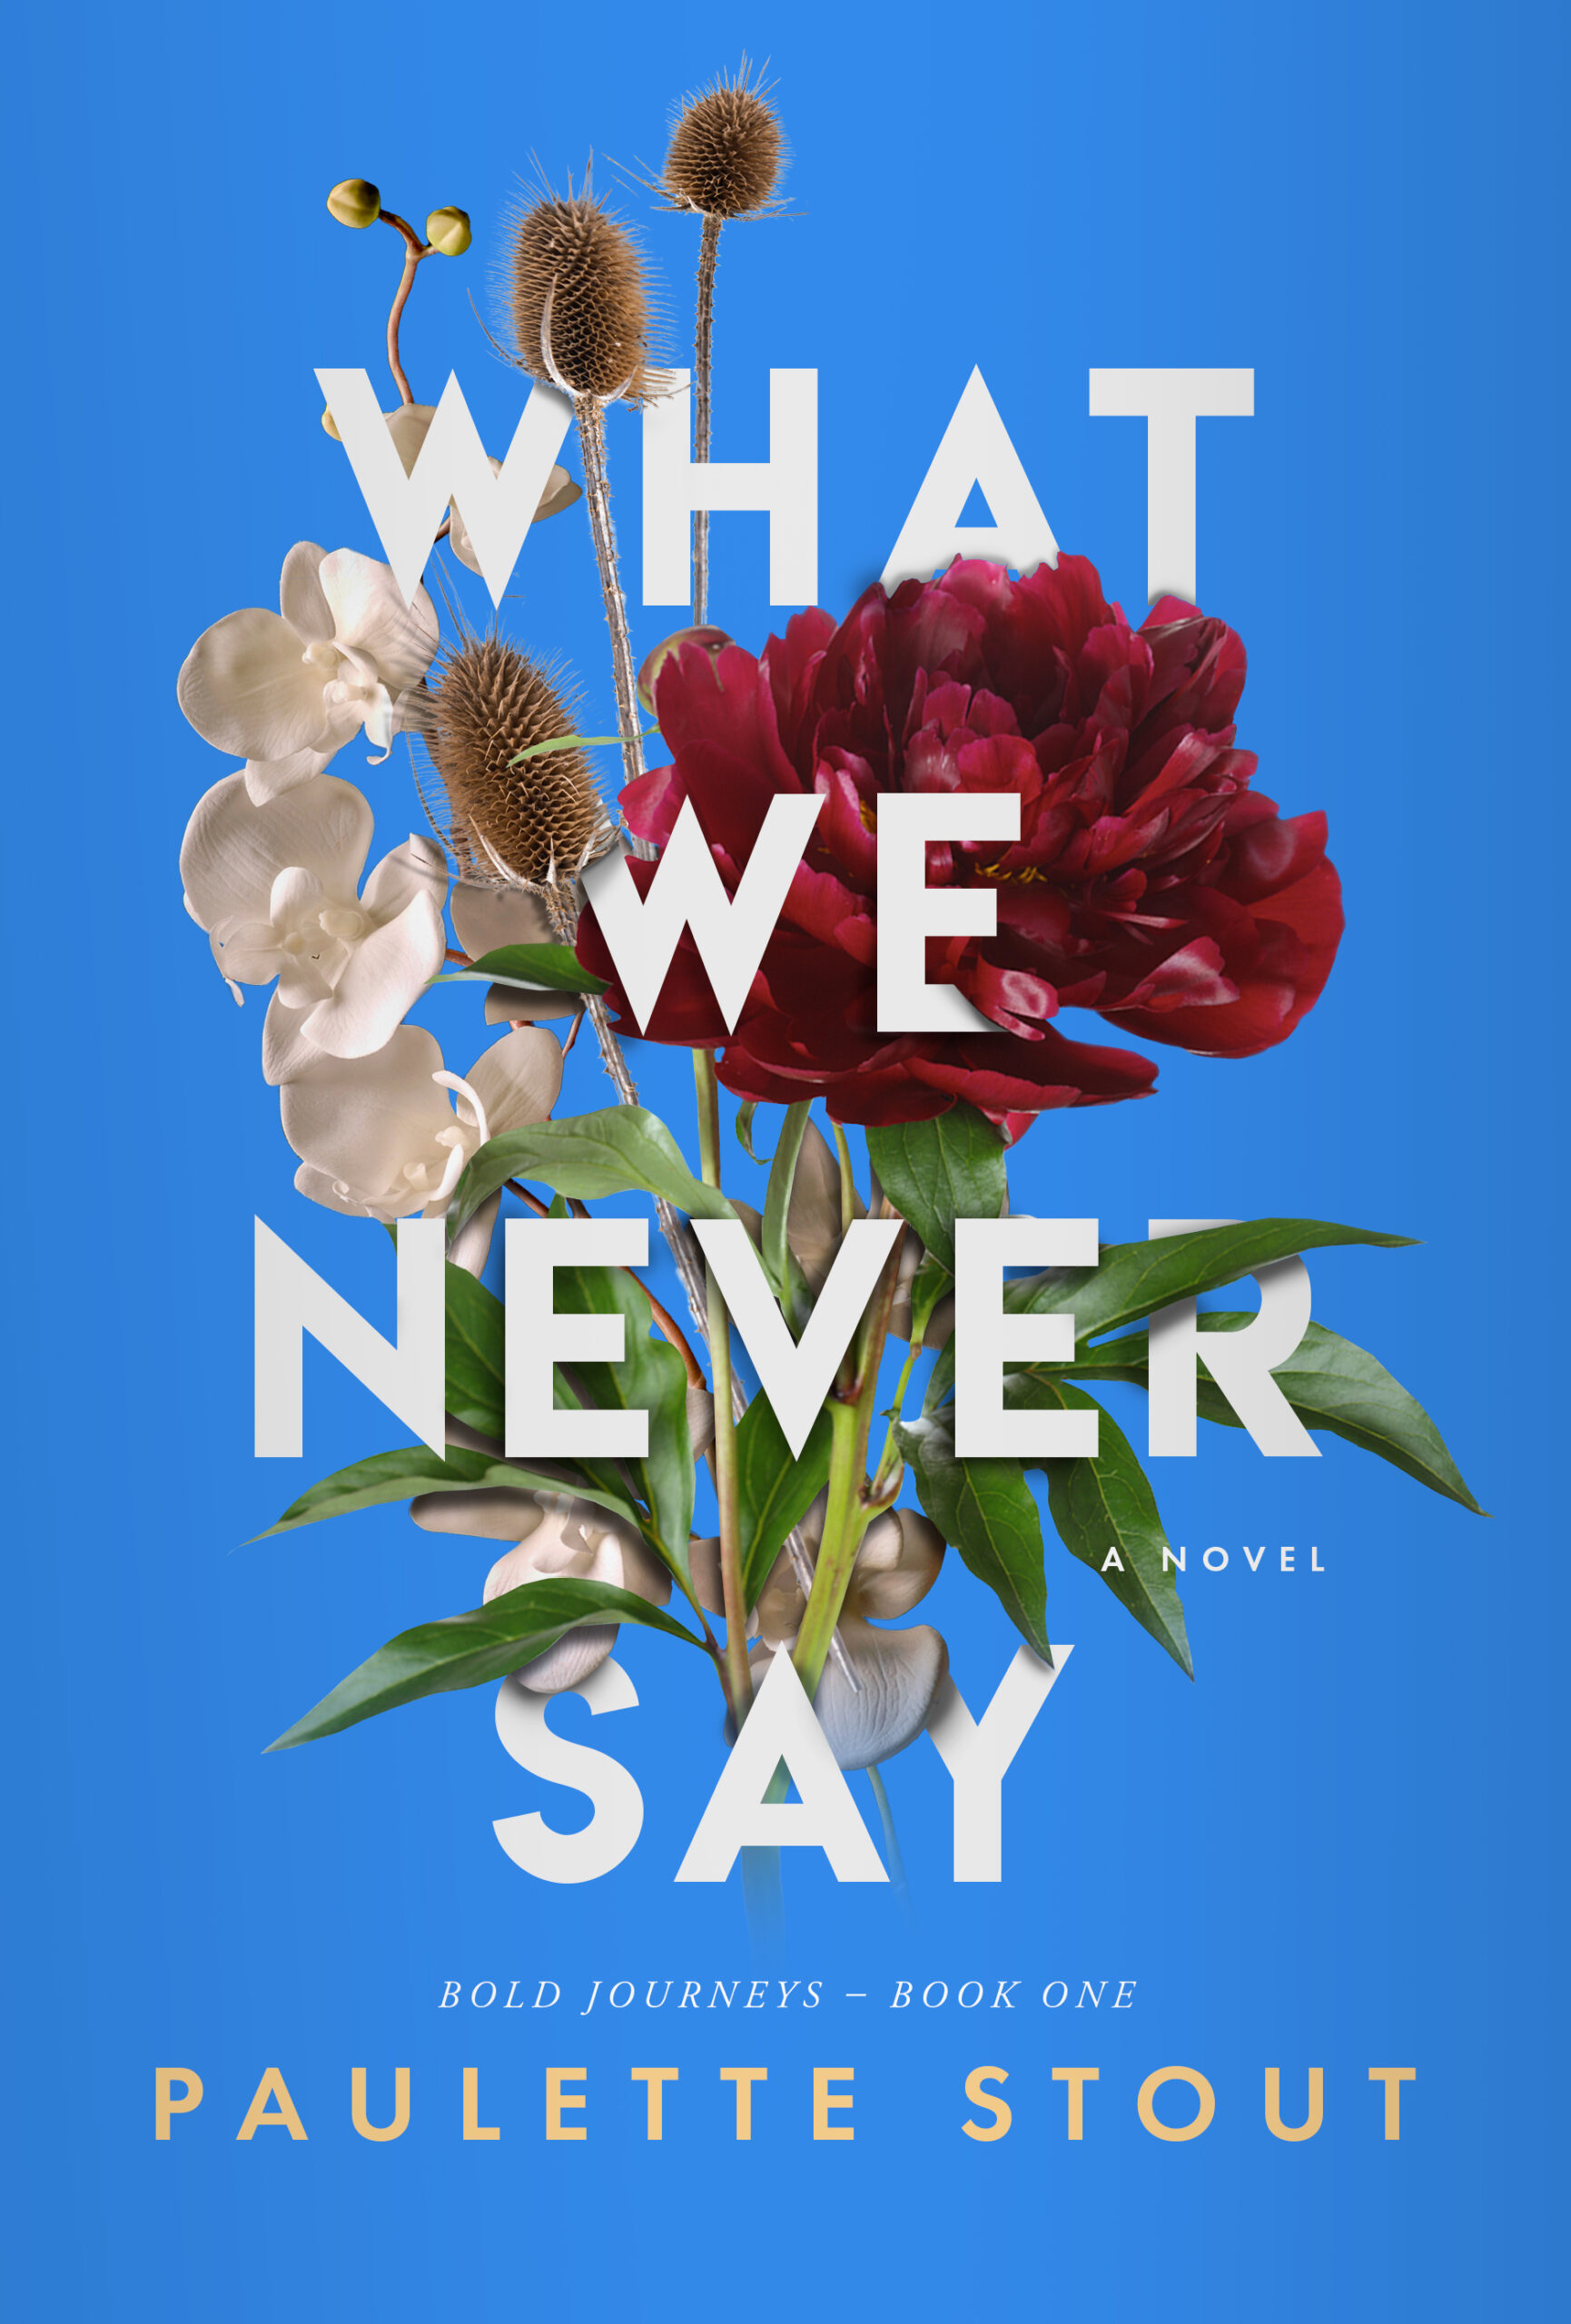 What We Never Say by Paulette Stout